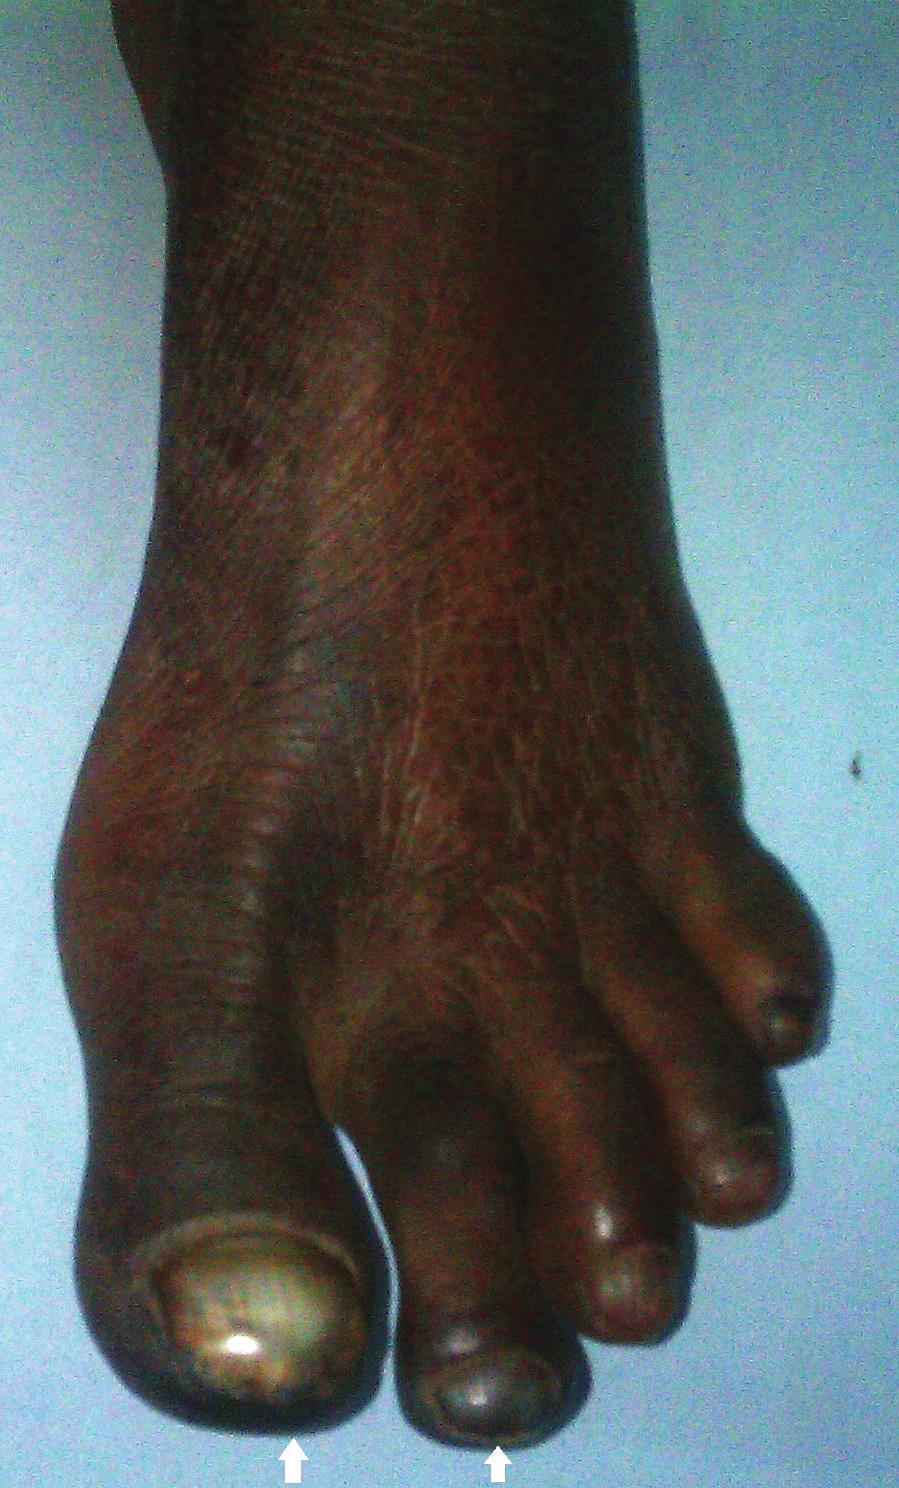 2 Figure 1: Left foot of the patient. The arrows depict gangrene of the 1st and 2nd toes. Also note the cyanosis of the rest of toes and ischemic changes on the skin of the foot.